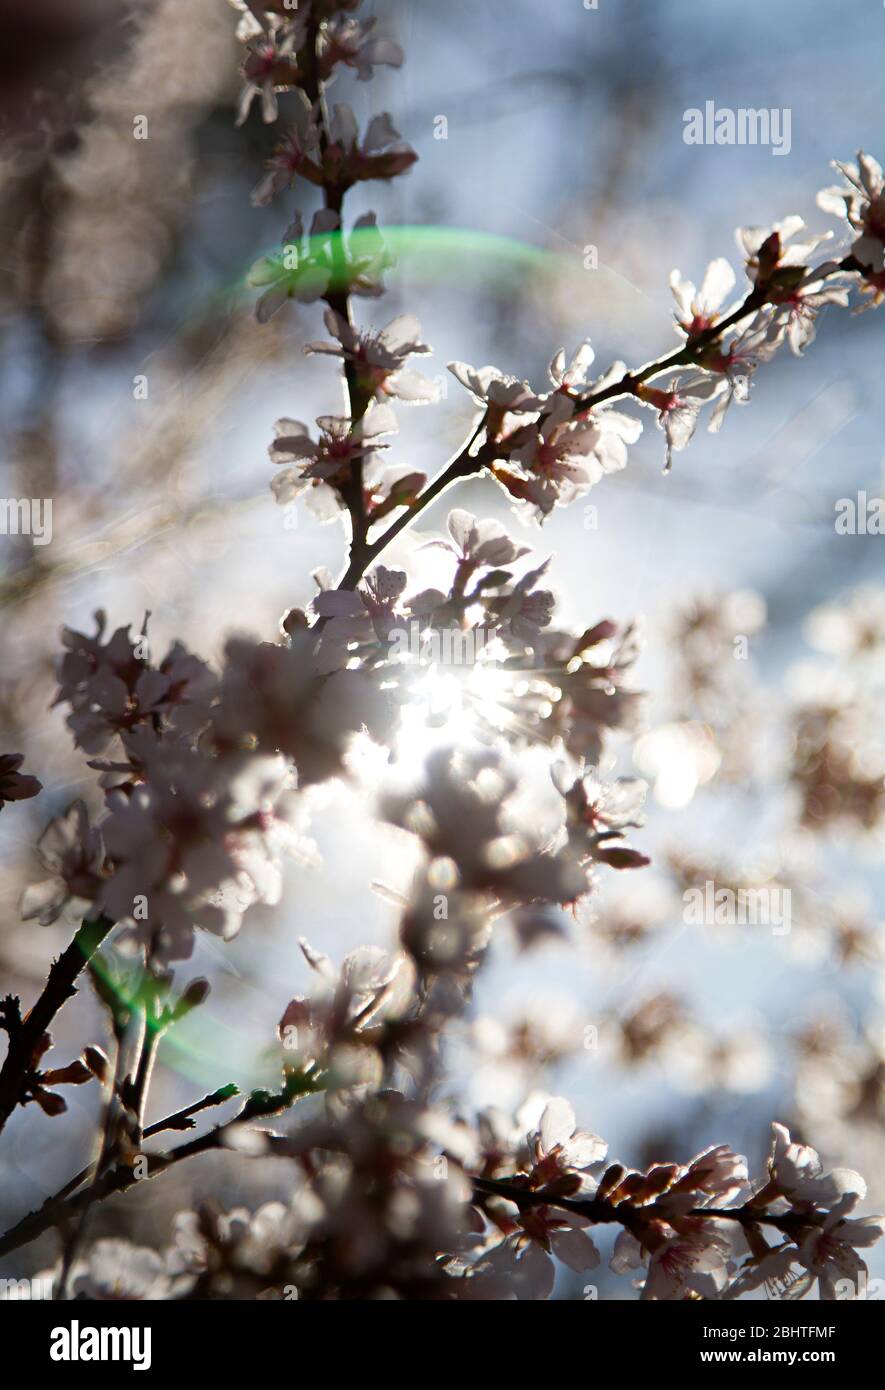 Flowers blossom on a branch during Canadian spring Stock Photo